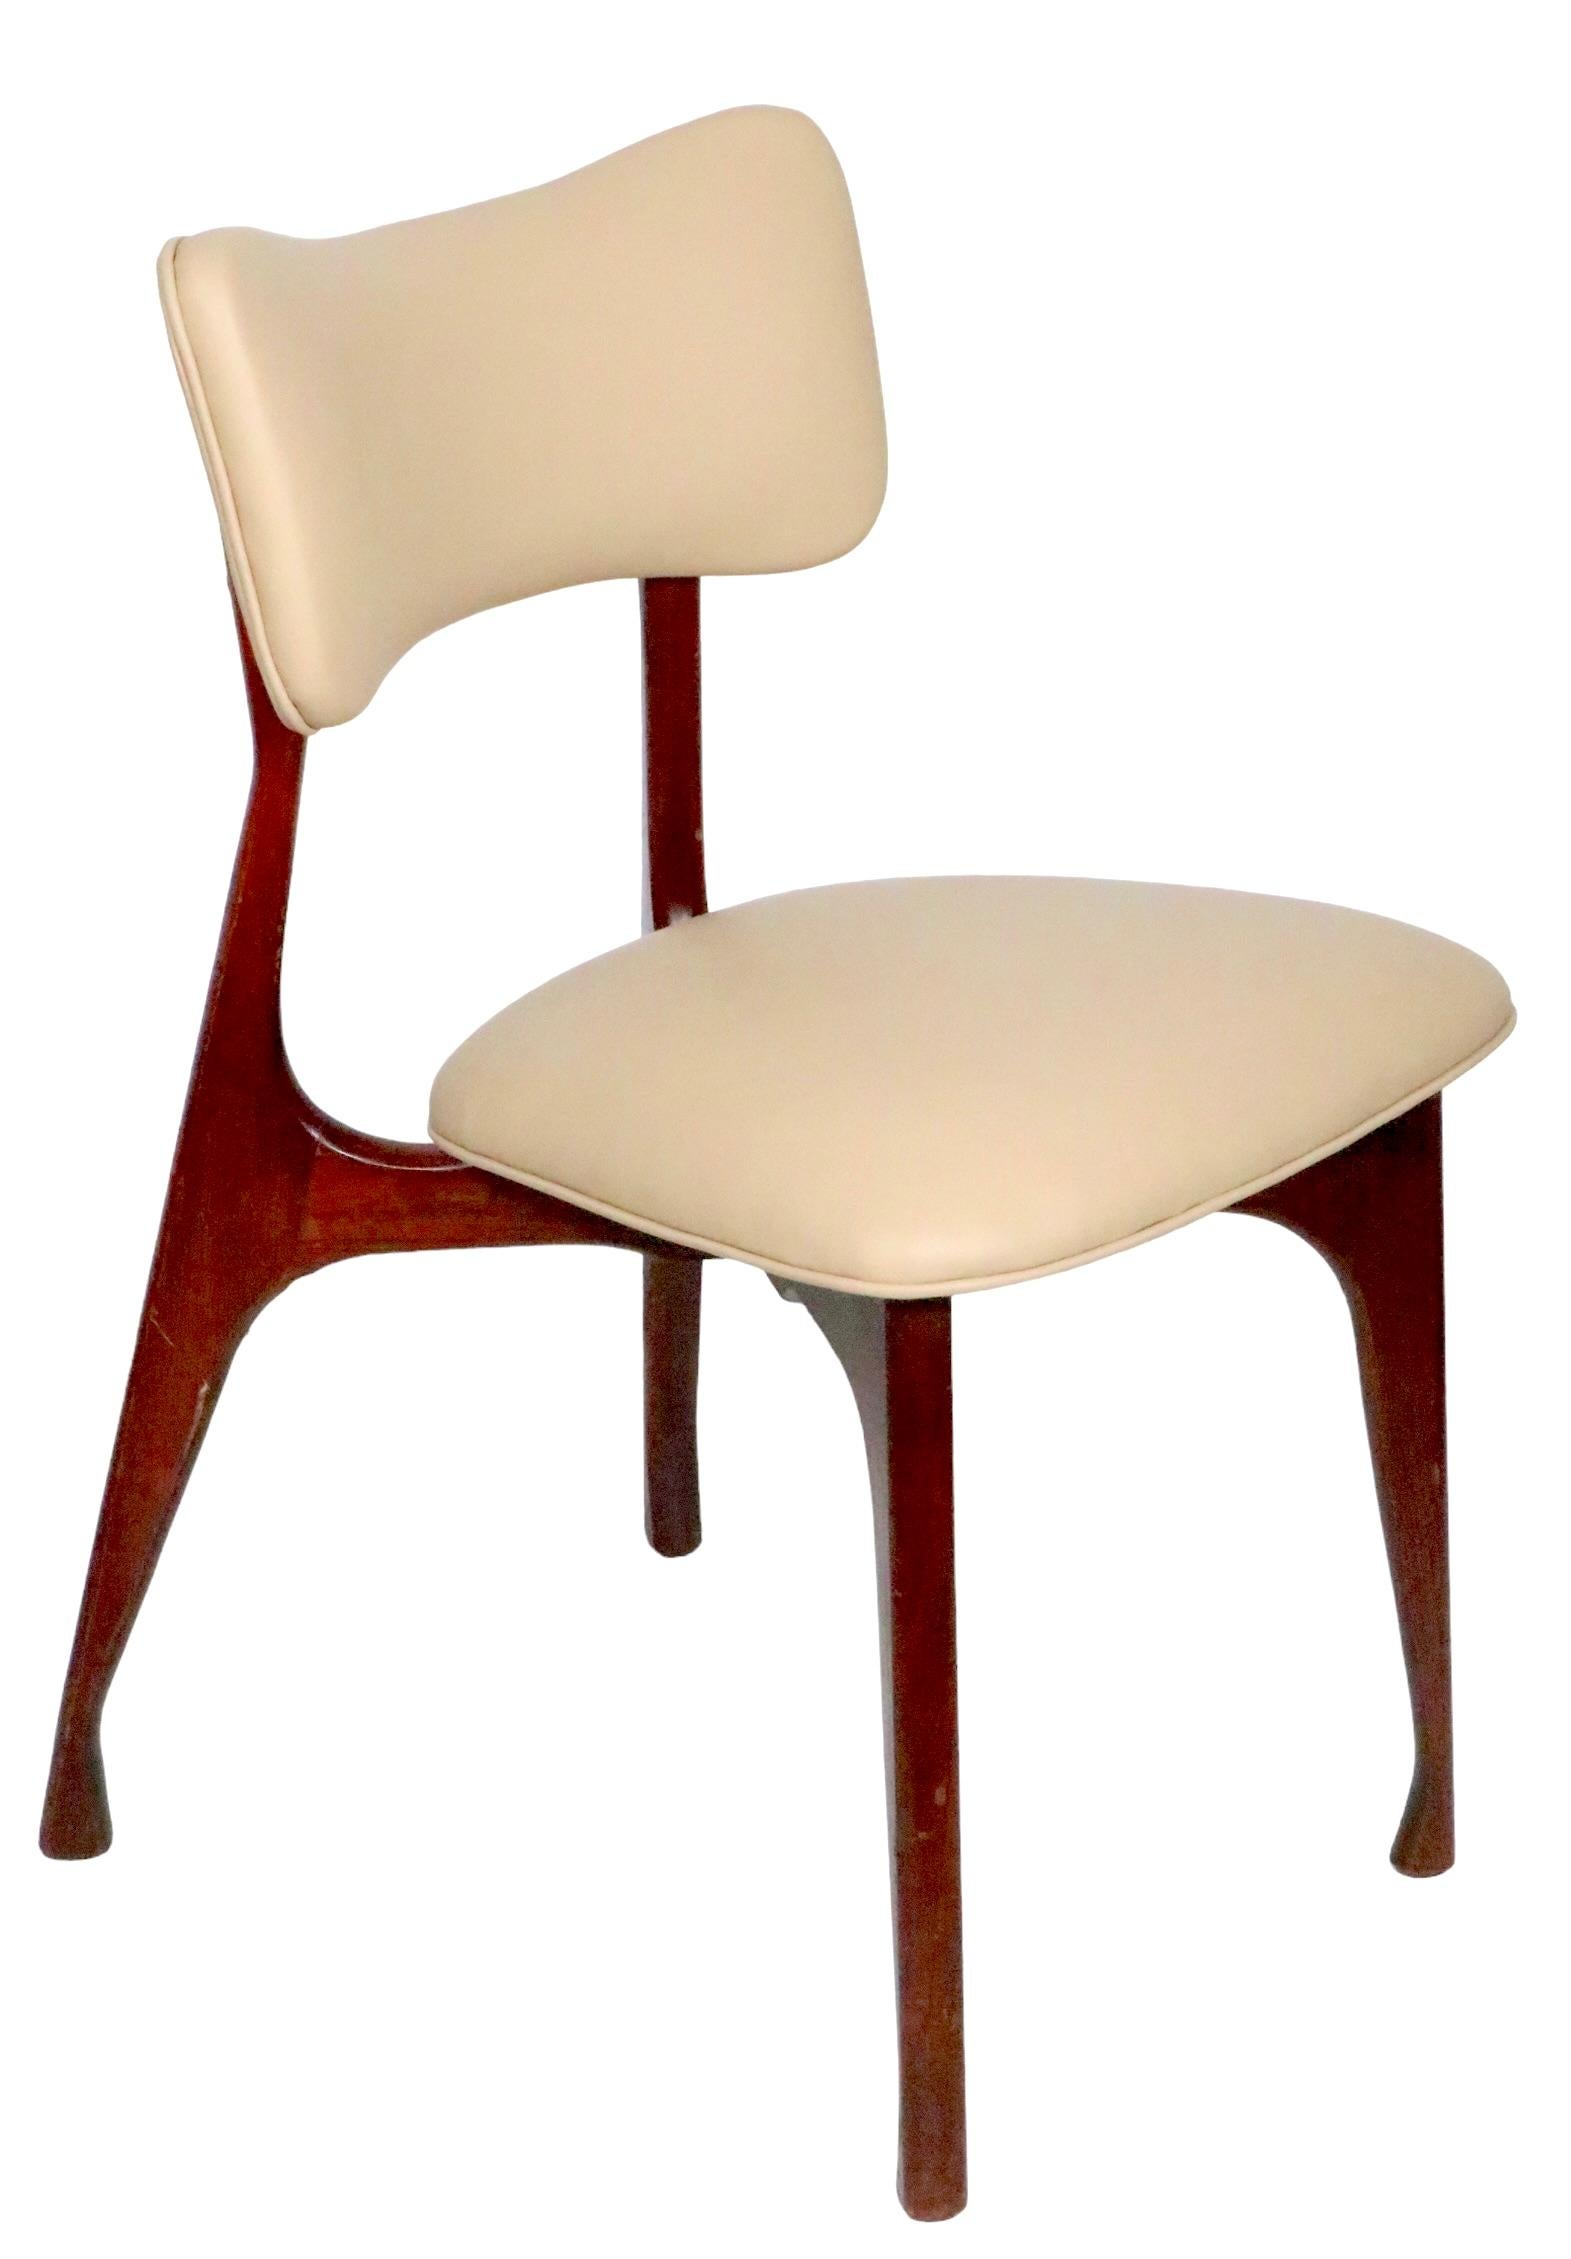 Chic sophisticated design mid century side chairs, in newly reupholstered ecru leather with sculptural wood frames. Italian made, attributed to Ice Parisi, circa 1940- 1950's. Both chairs are structurally sound and sturdy, the wood finish shows